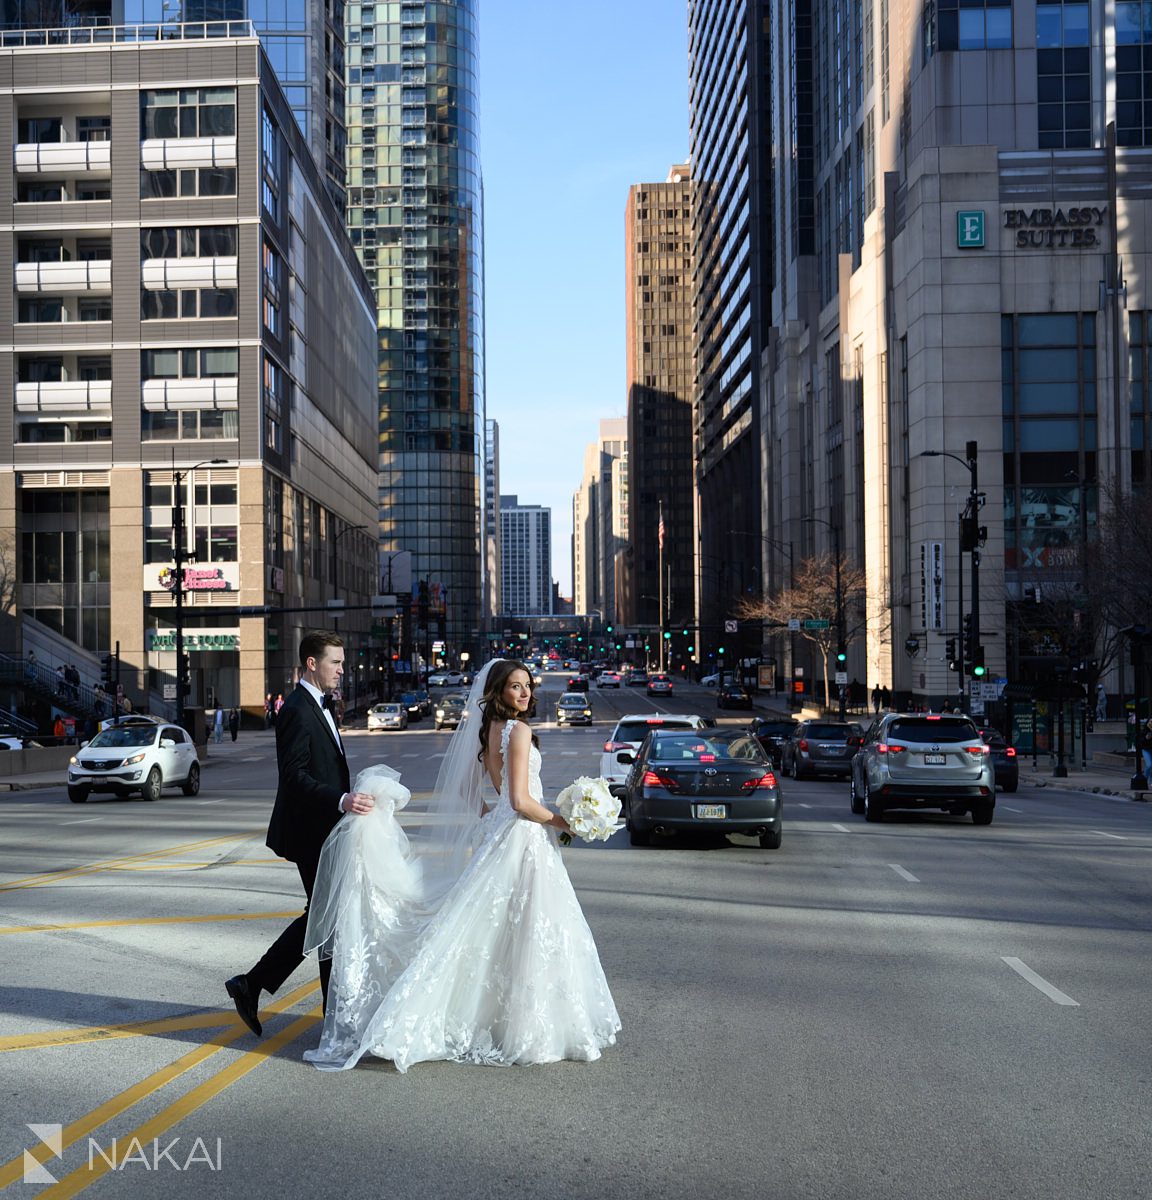 Loews Chicago Hotel wedding pictures outside bride and groom portraits Columbus dr